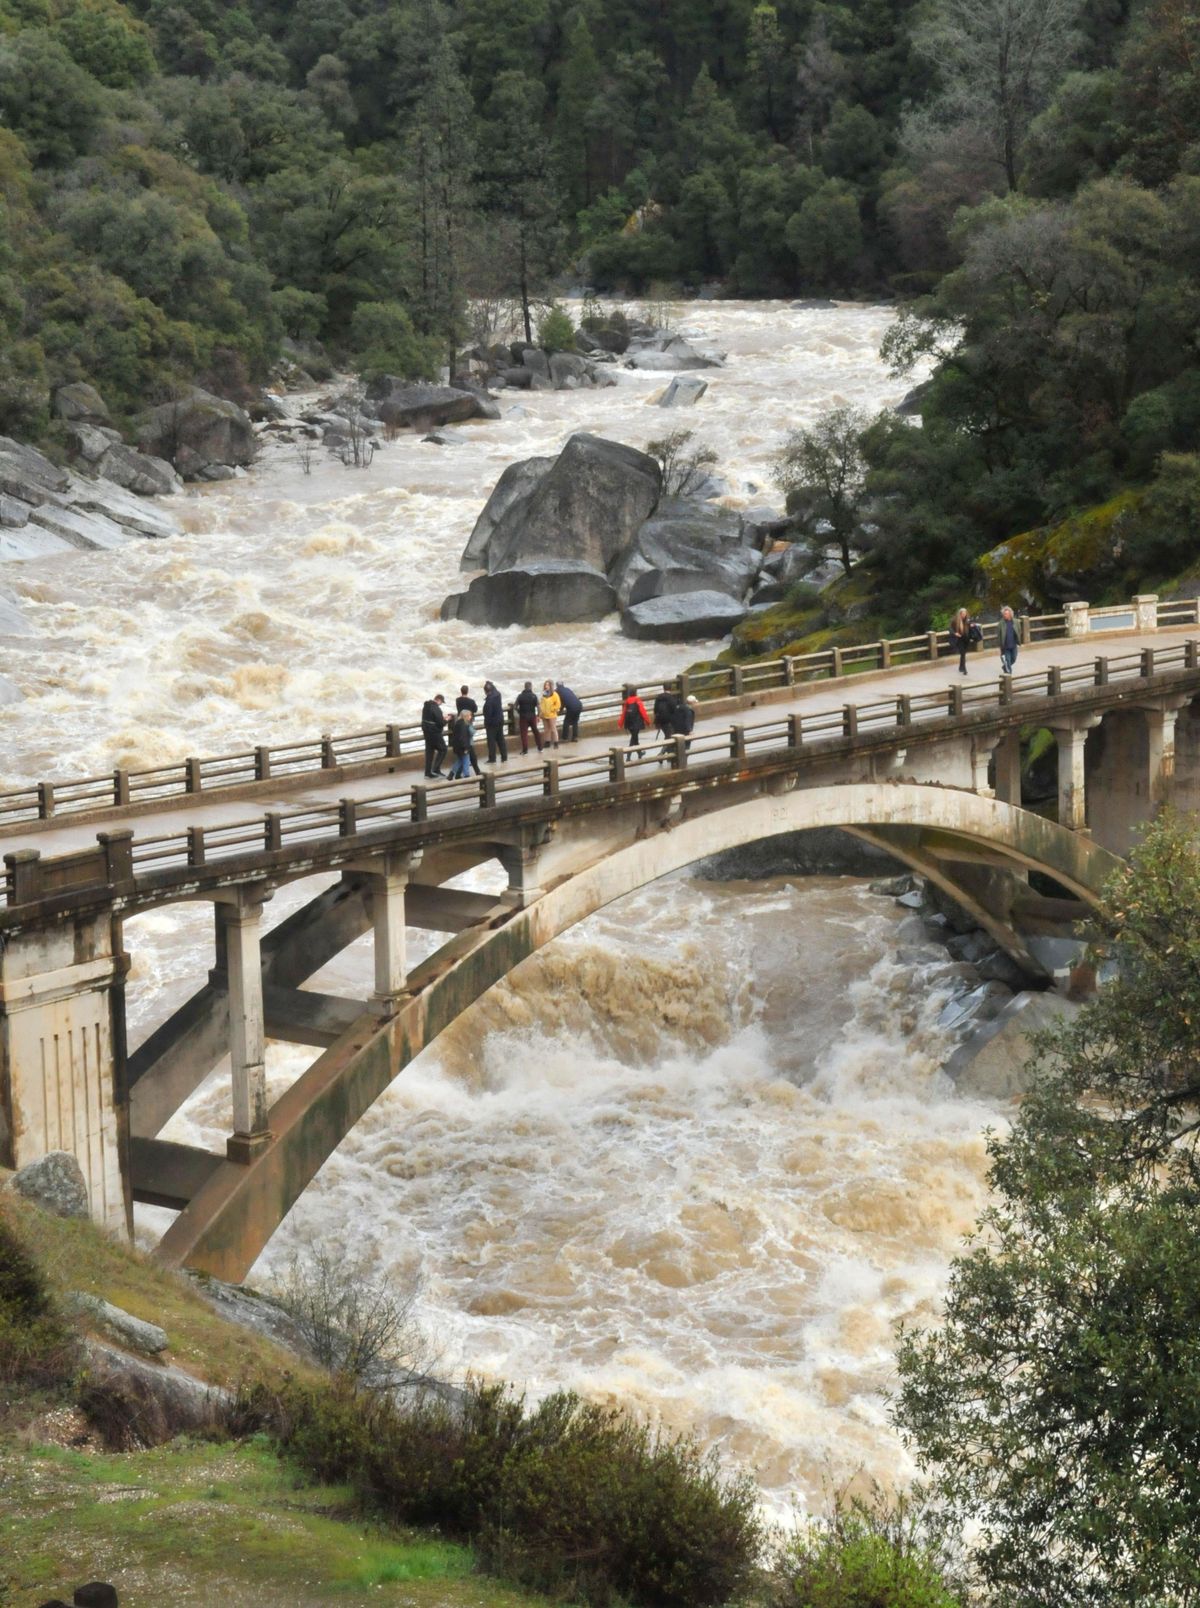 Spectators gather on the historic Highway 49 bridge over the South Fork Yuba River Thursday, March 22, 2018 to witness an intense amount of rain and snowmelt runoff rush downstream during Thursday’s atmospheric river event. (Elias Funez / Associated Press)